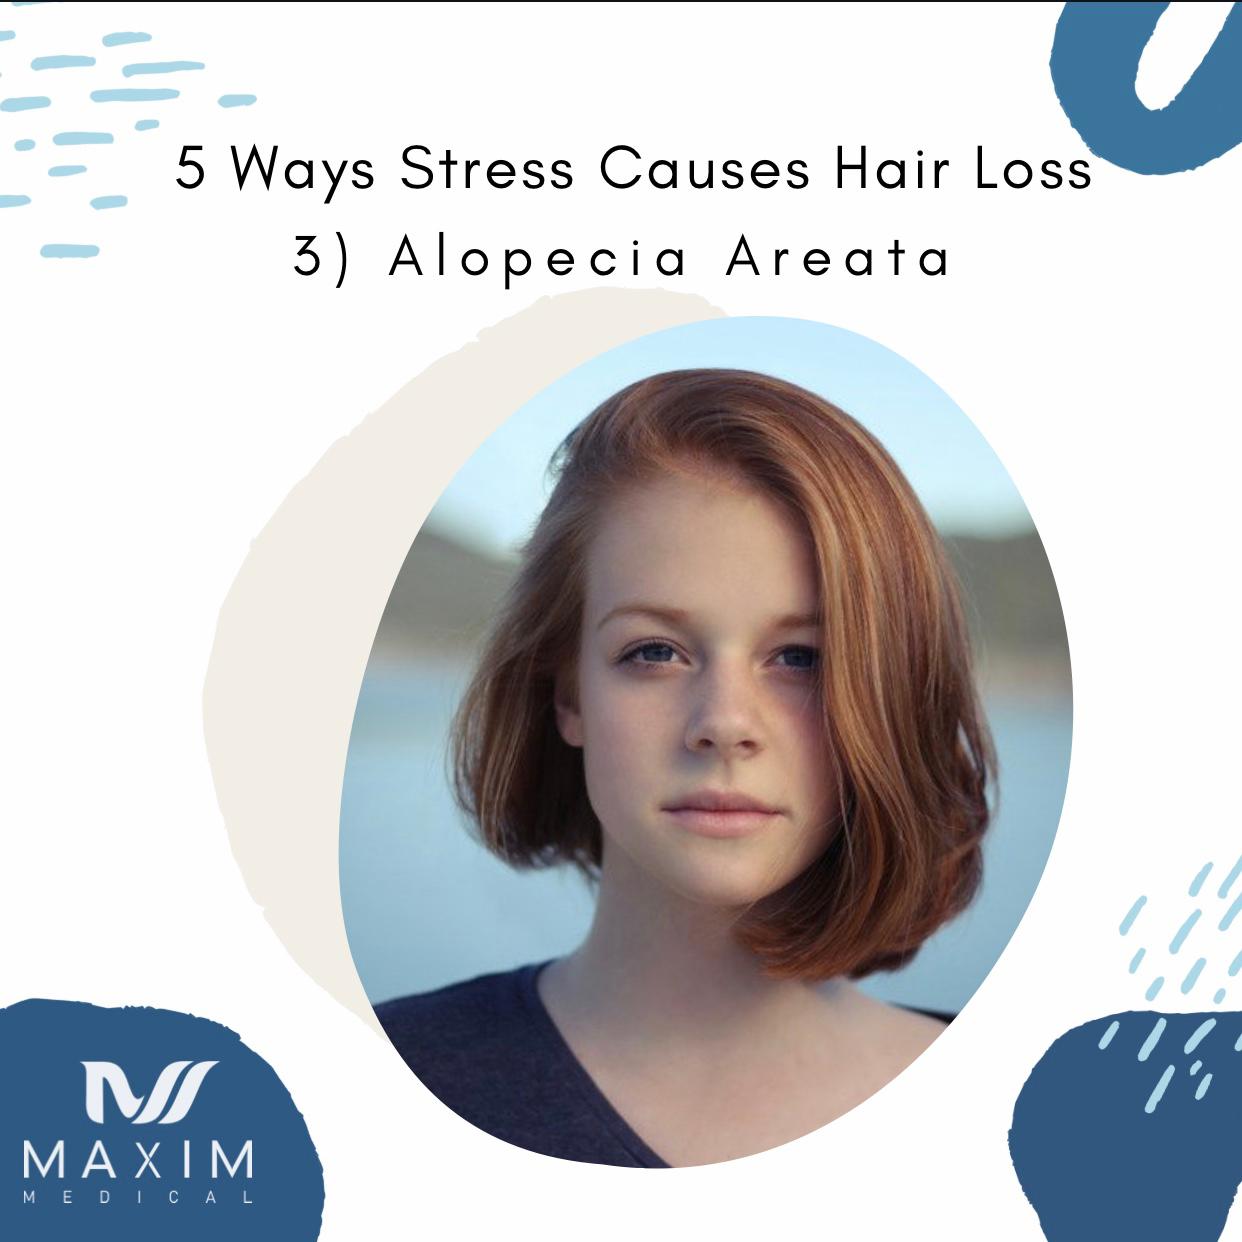 3. Alopecia Areata

Alopecia Areata is one of many types of hair loss. Alopecia itself is characterized by your body’s own immune system attacking your hair follicles thus causing hair loss. In normal circumstances, your immune system acts as a defense from foriegn bacteria and viruses. In the case of Alopecia Areata, your immune system views hair follicles as foreign thus they attack them. This specific type of hair loss is also characterized by hair loss in small round patches. This can occur in both men and women equally, though it is not very well understood why it happens.